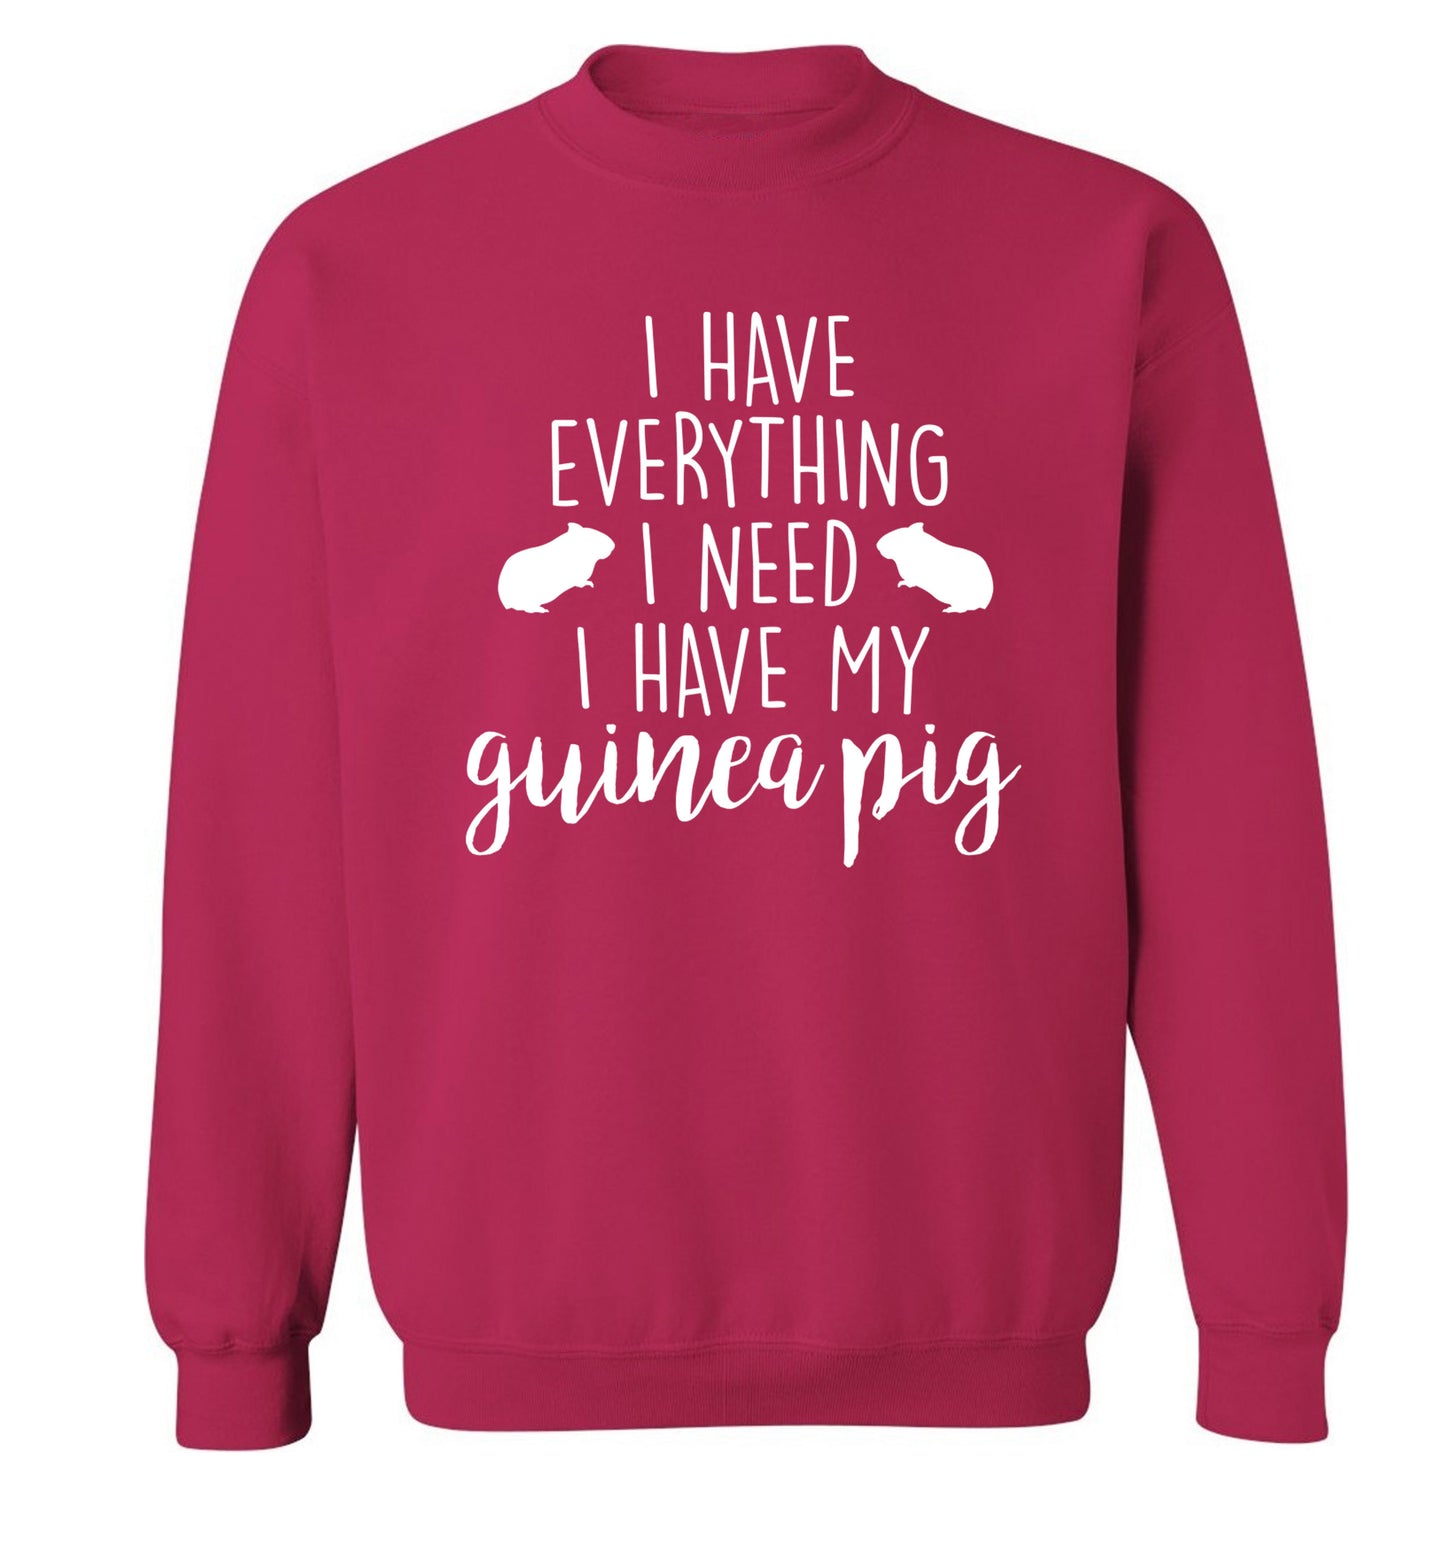 I have everything I need, I have my guinea pig Adult's unisex pink  sweater XL